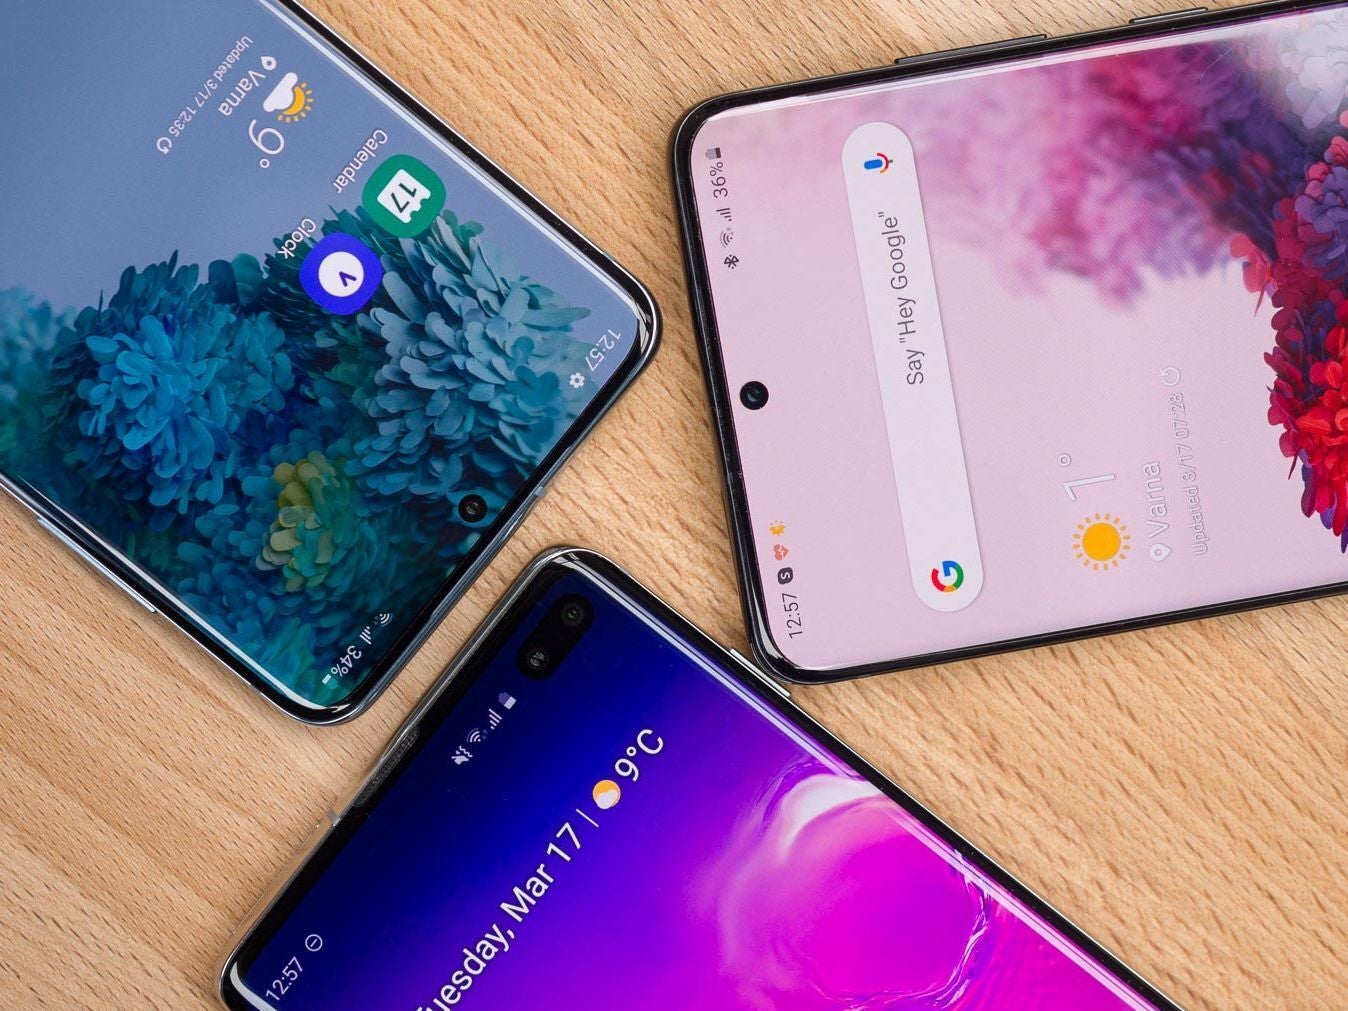 The S20 phones have two more years of support, making them a great choice even now. - Samsung sticks to its promise and releases a new security update for the Galaxy S20